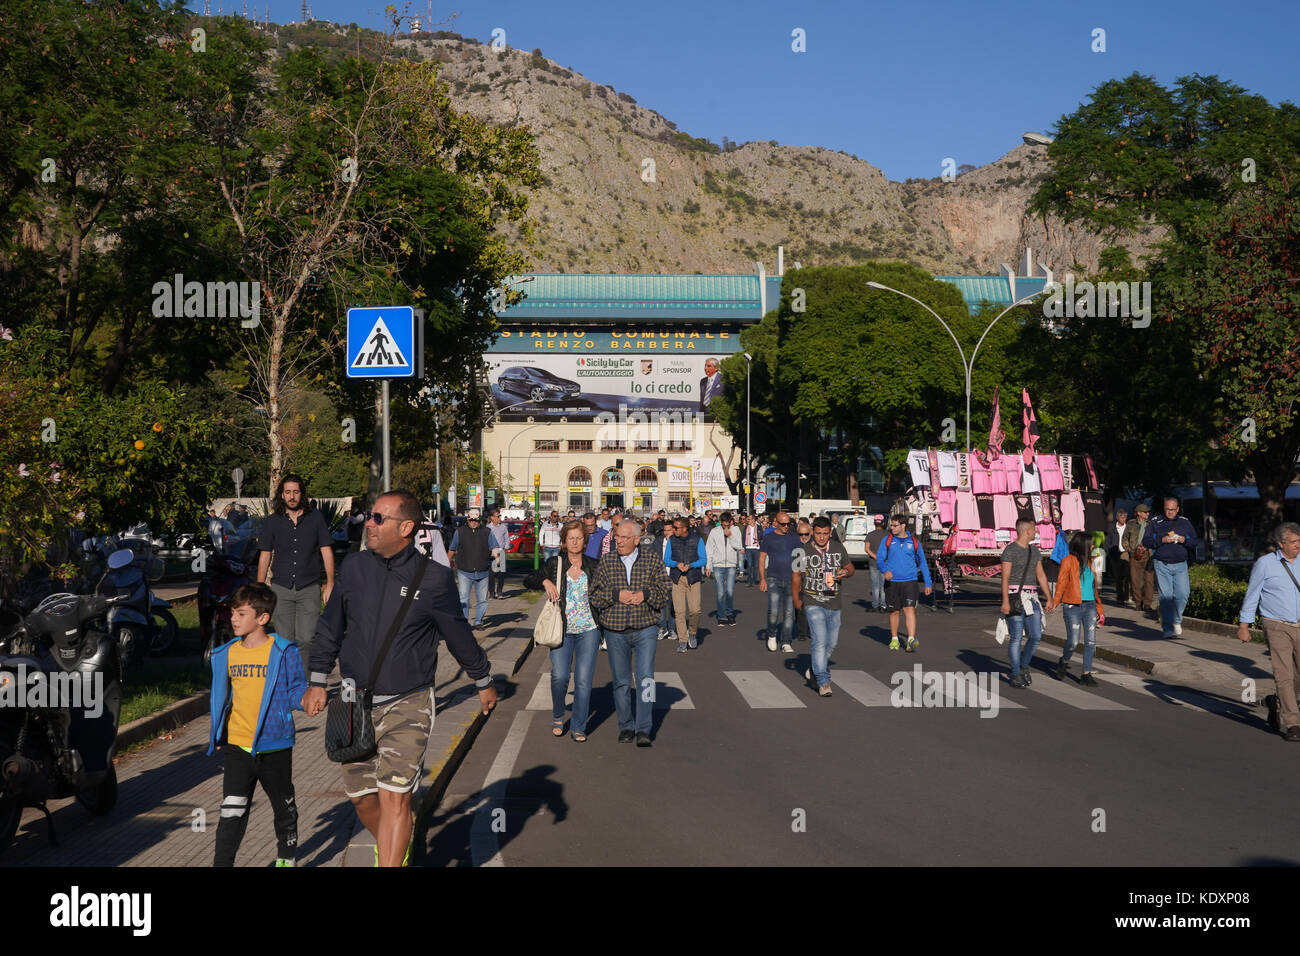 Fans leaving the stadio Renzo Barbera, the home ground of U.S. Cite di Palermo football club, after a Serie B match against Parma. From a series of tr Stock Photo